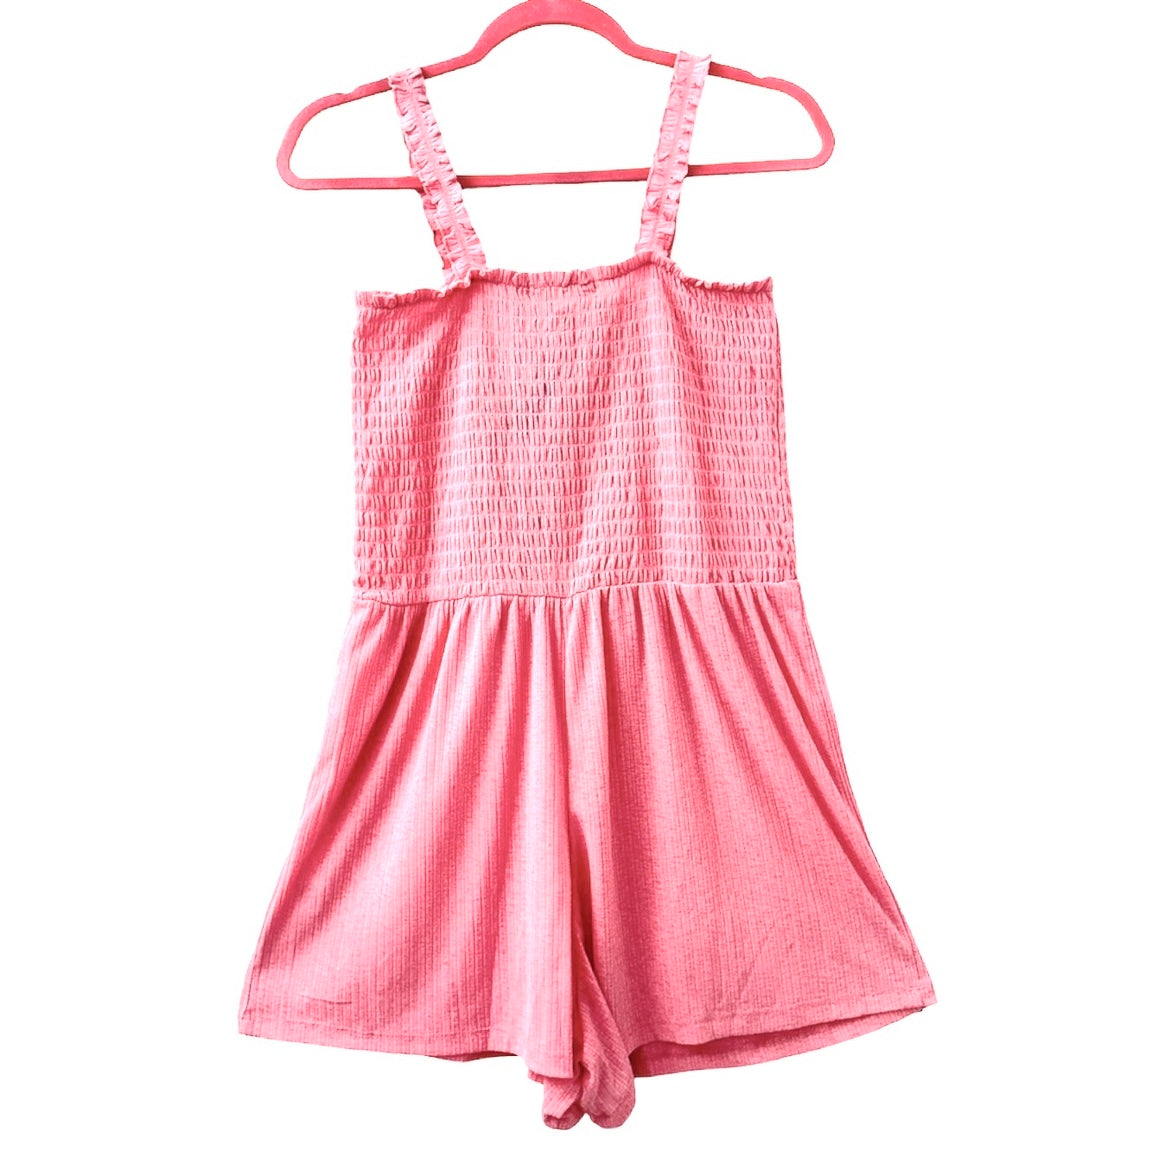 Scrunchie Strap Morning Glory Pink Size M Women's Cover Up Romper